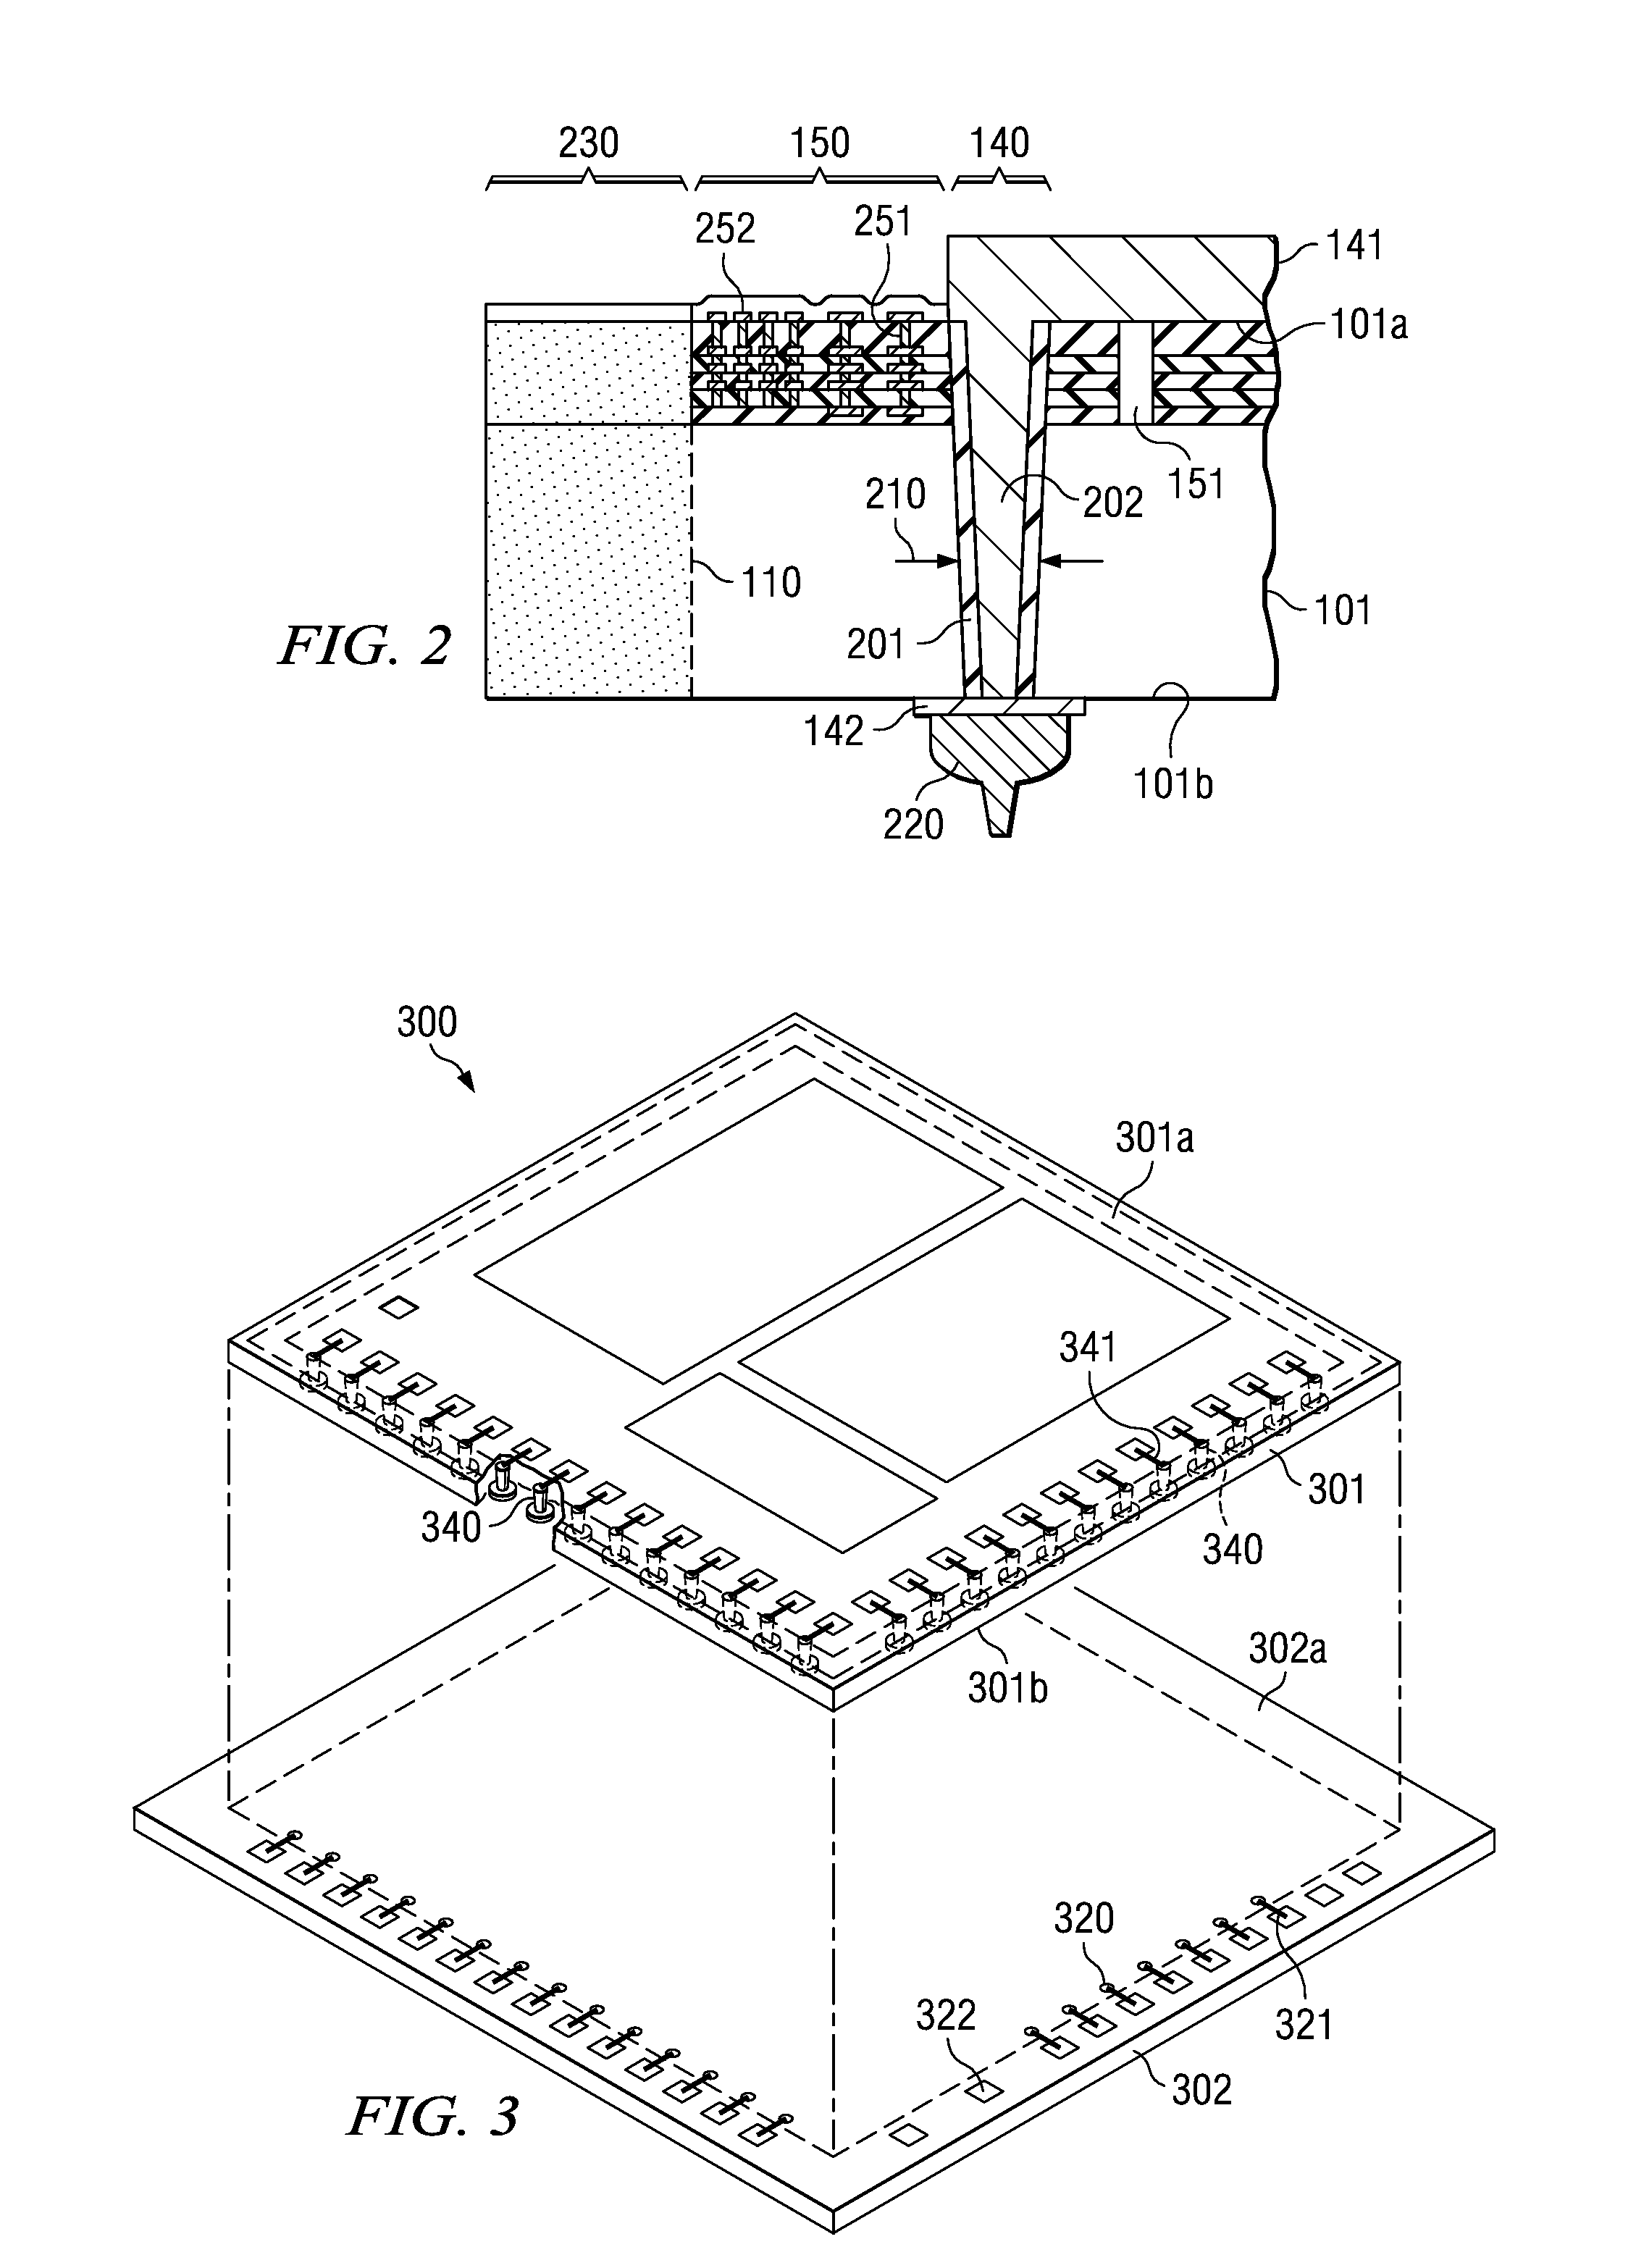 Method for Stacking Semiconductor Chips